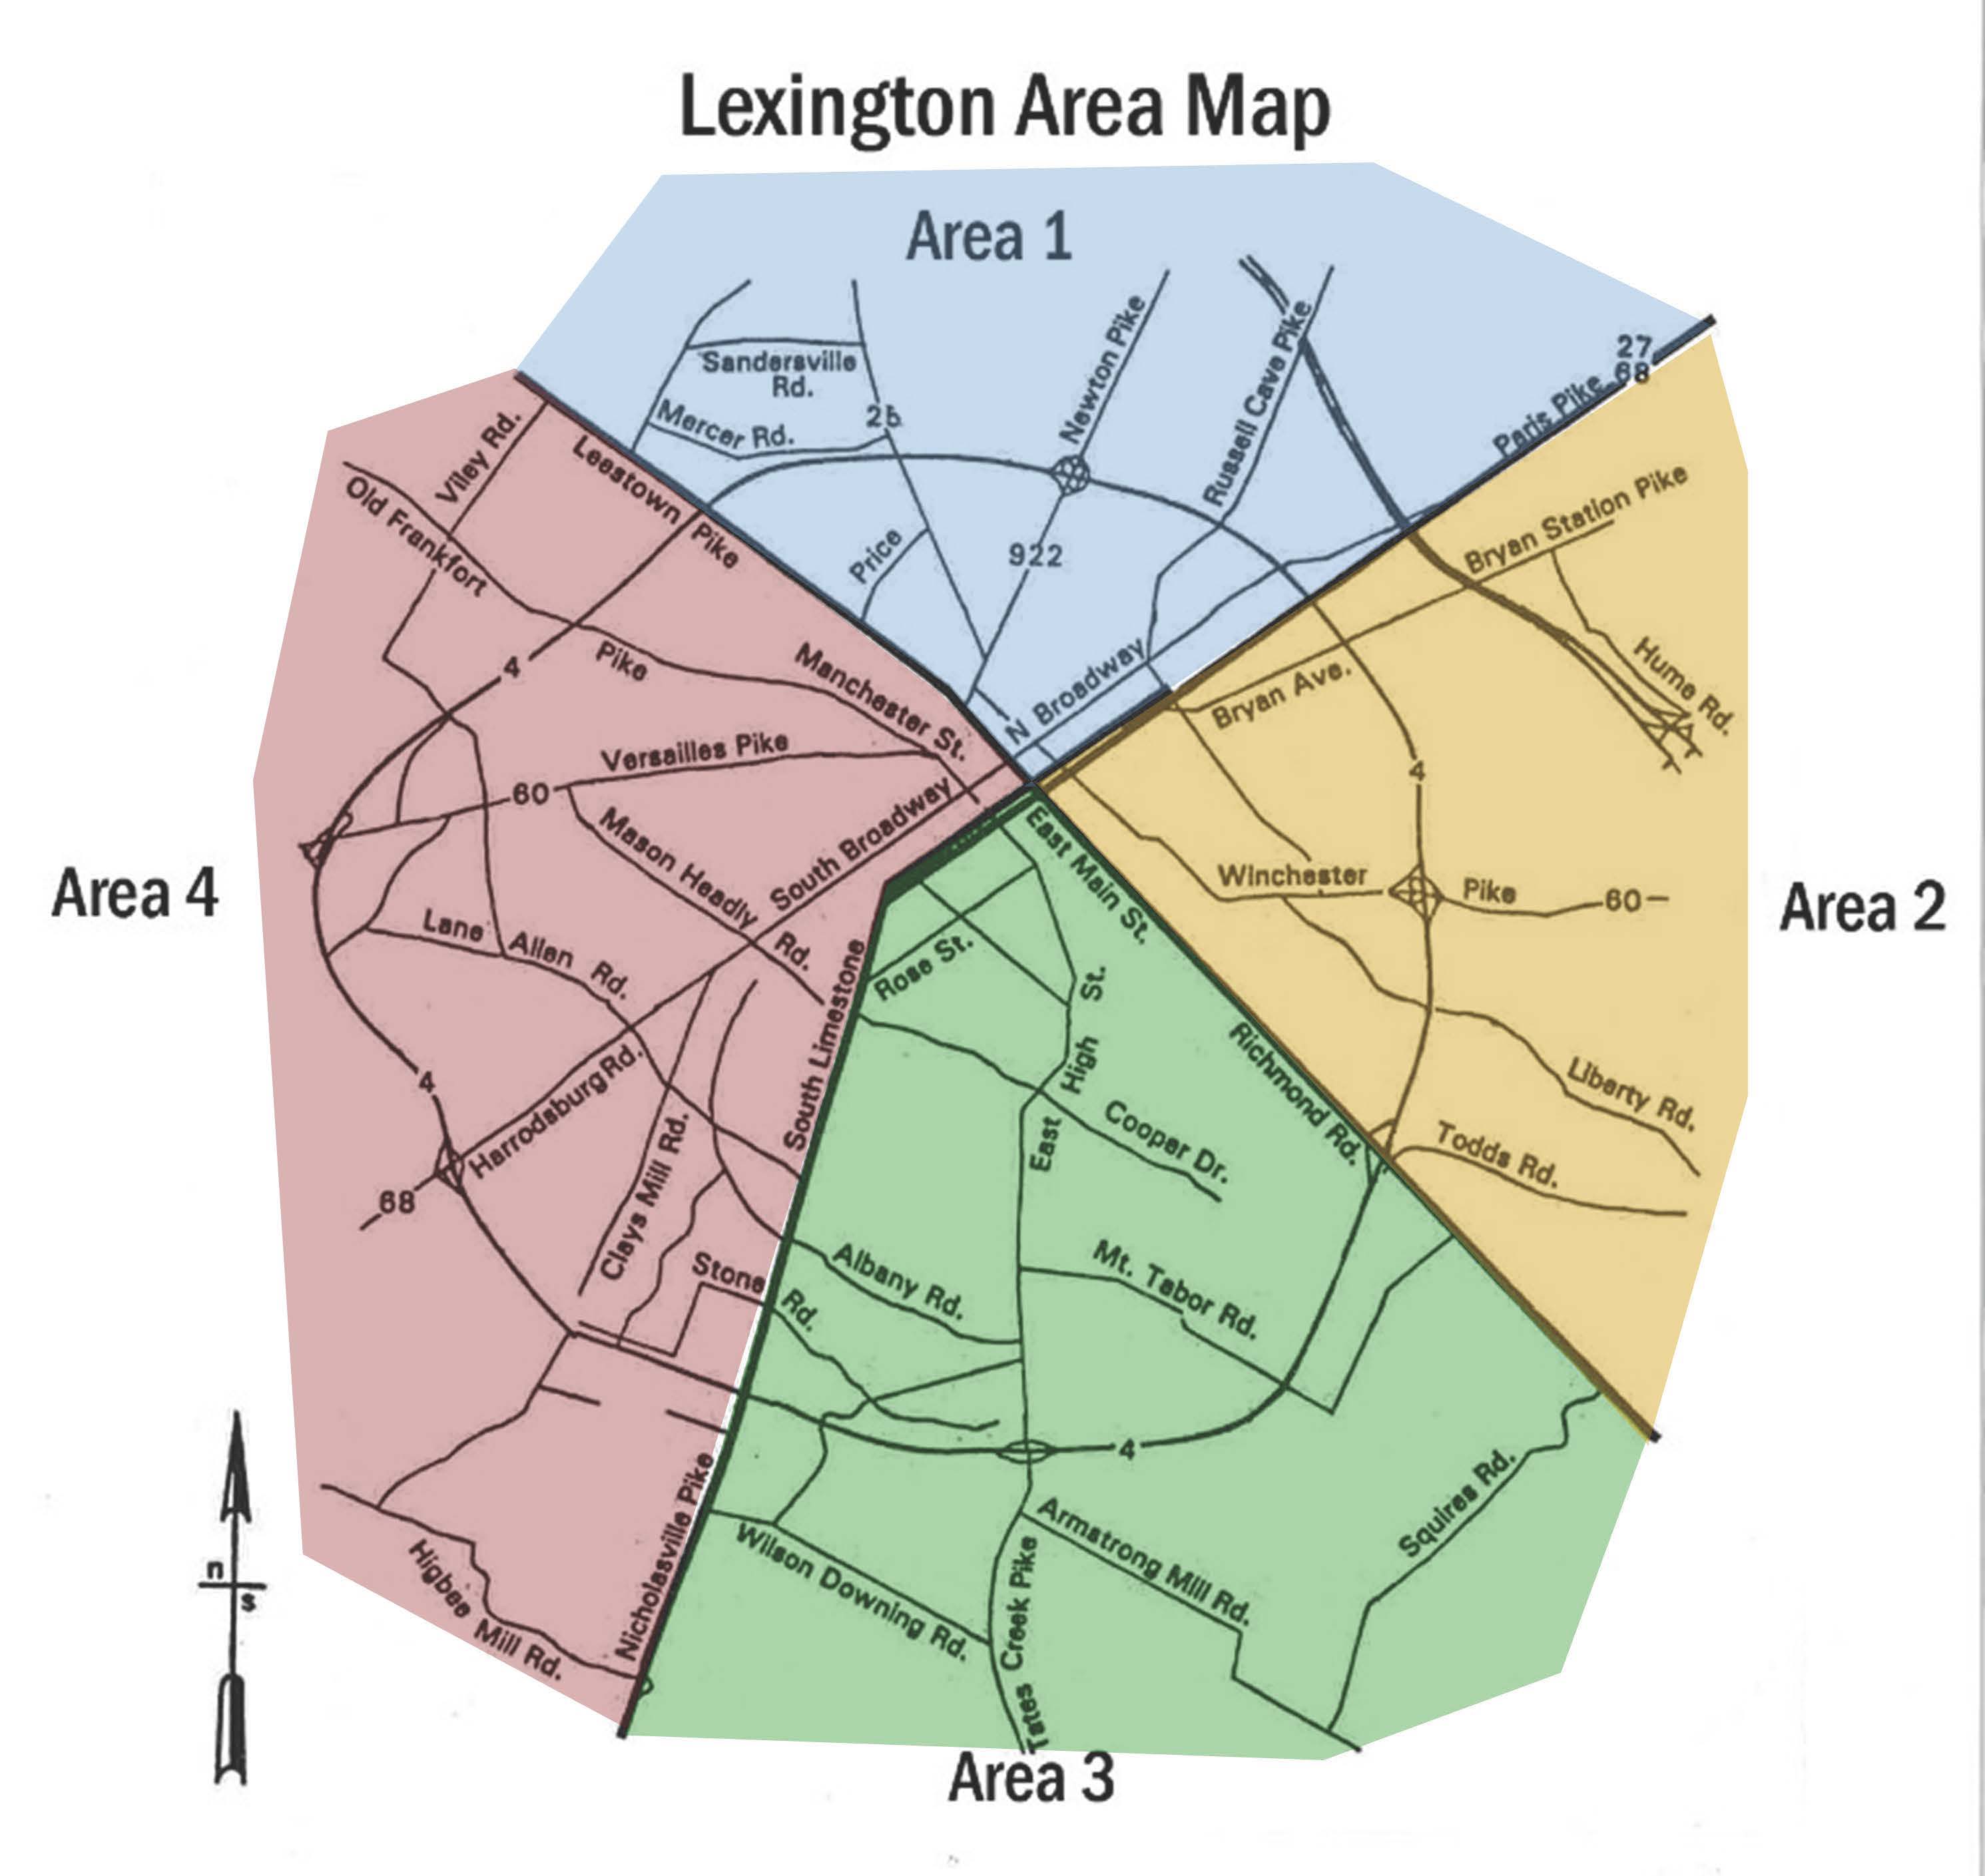 Map of Lexington showing the 4 grouping areas of the Lexington real estate market